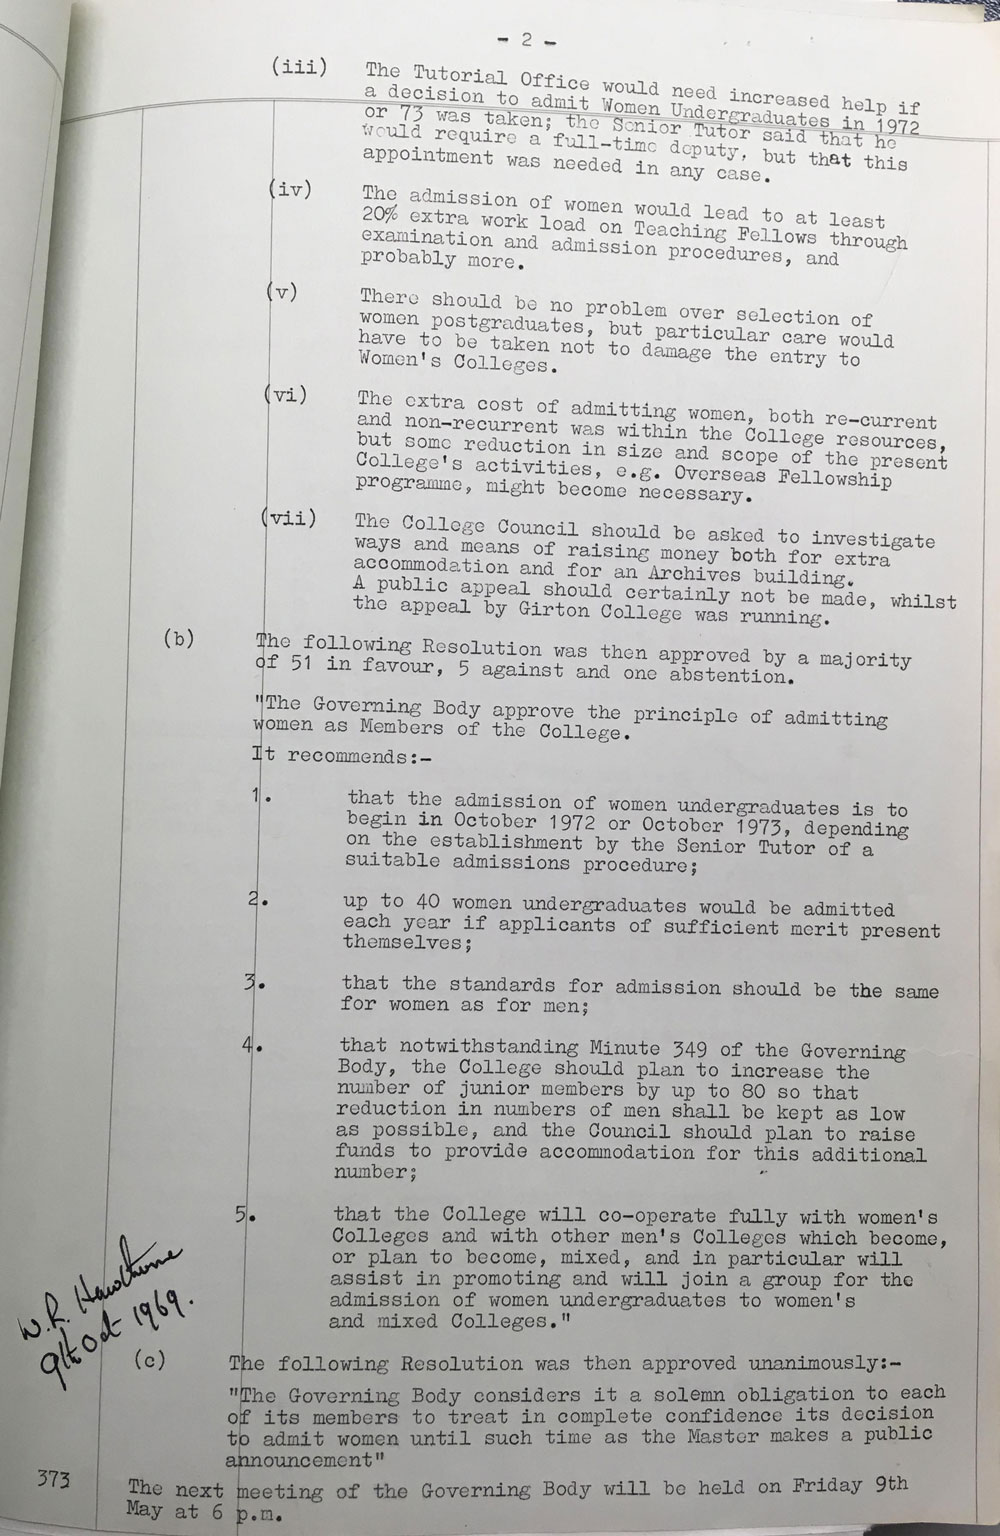 College Council minutes, 8 March 1969